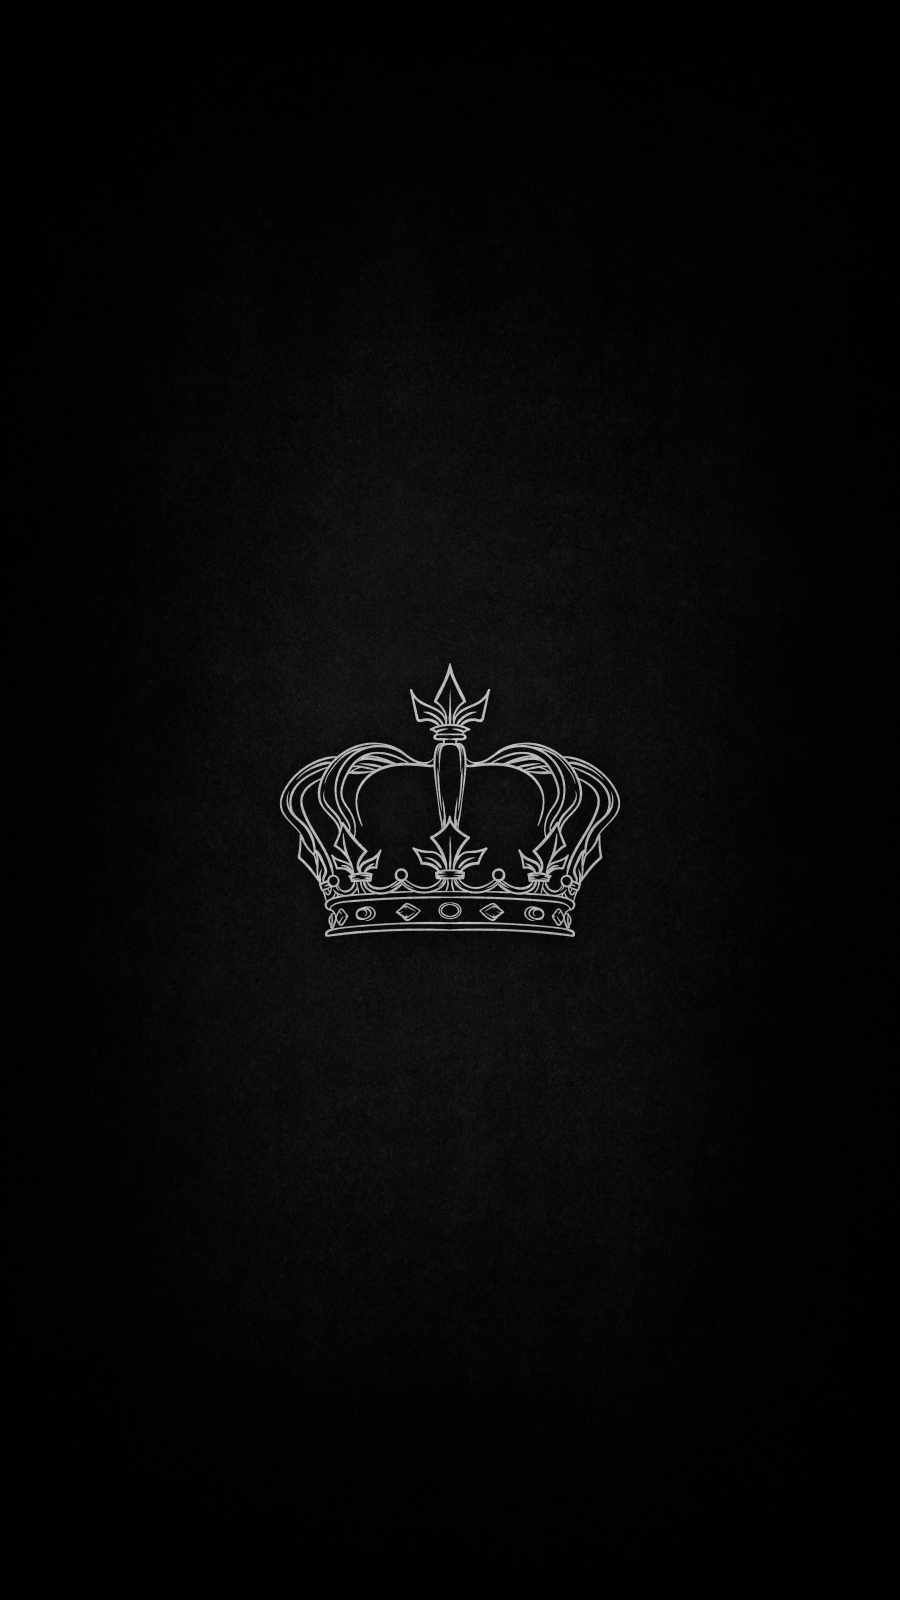 Dark King Crown iPhone Wallpaper. Android wallpaper dark, Black wallpaper iphone, iPhone wallpaper